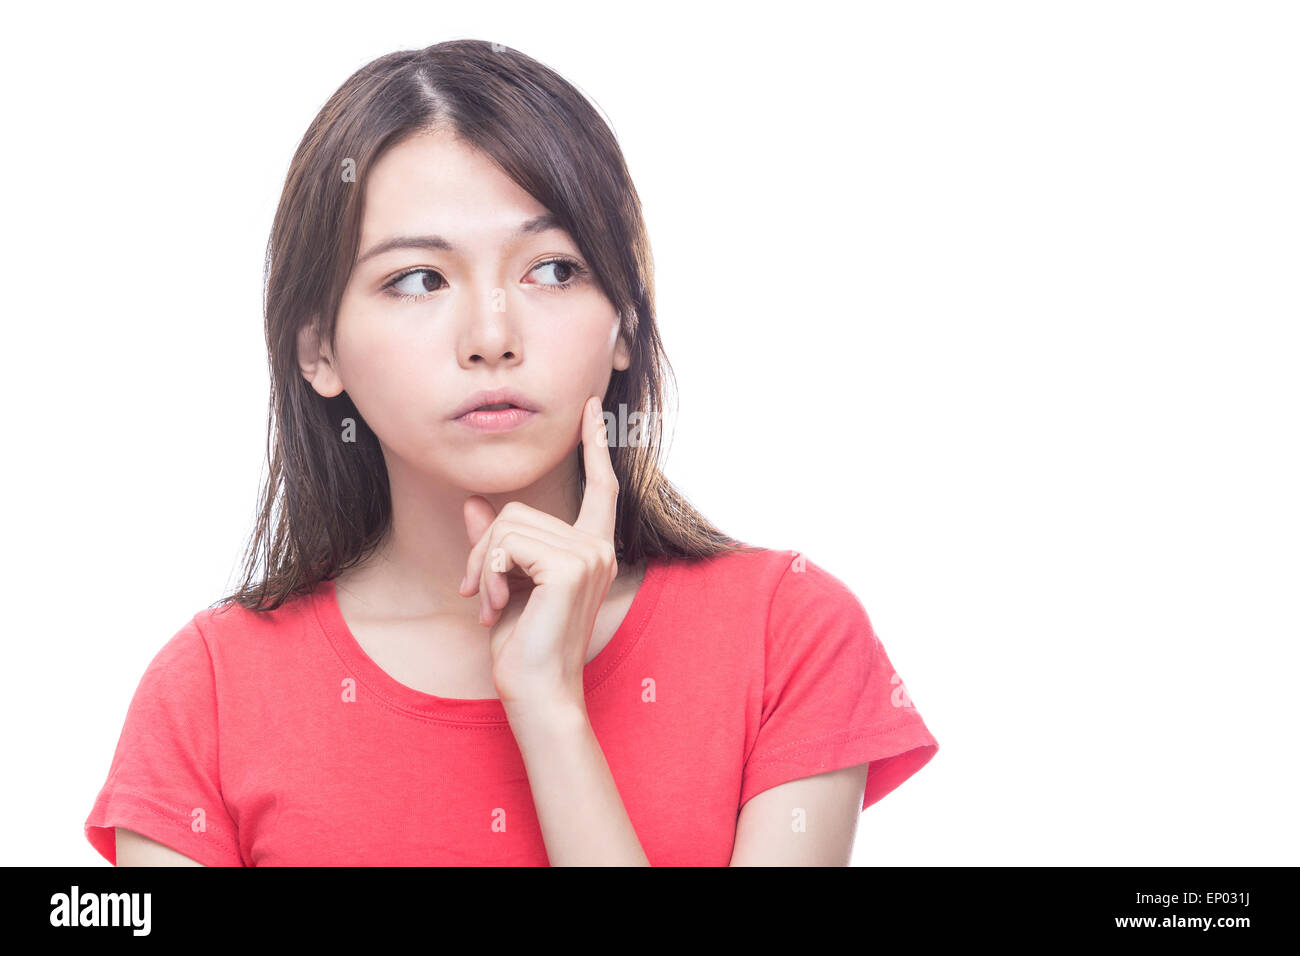 Chinese woman with hand on face looking to side, thinking Stock Photo